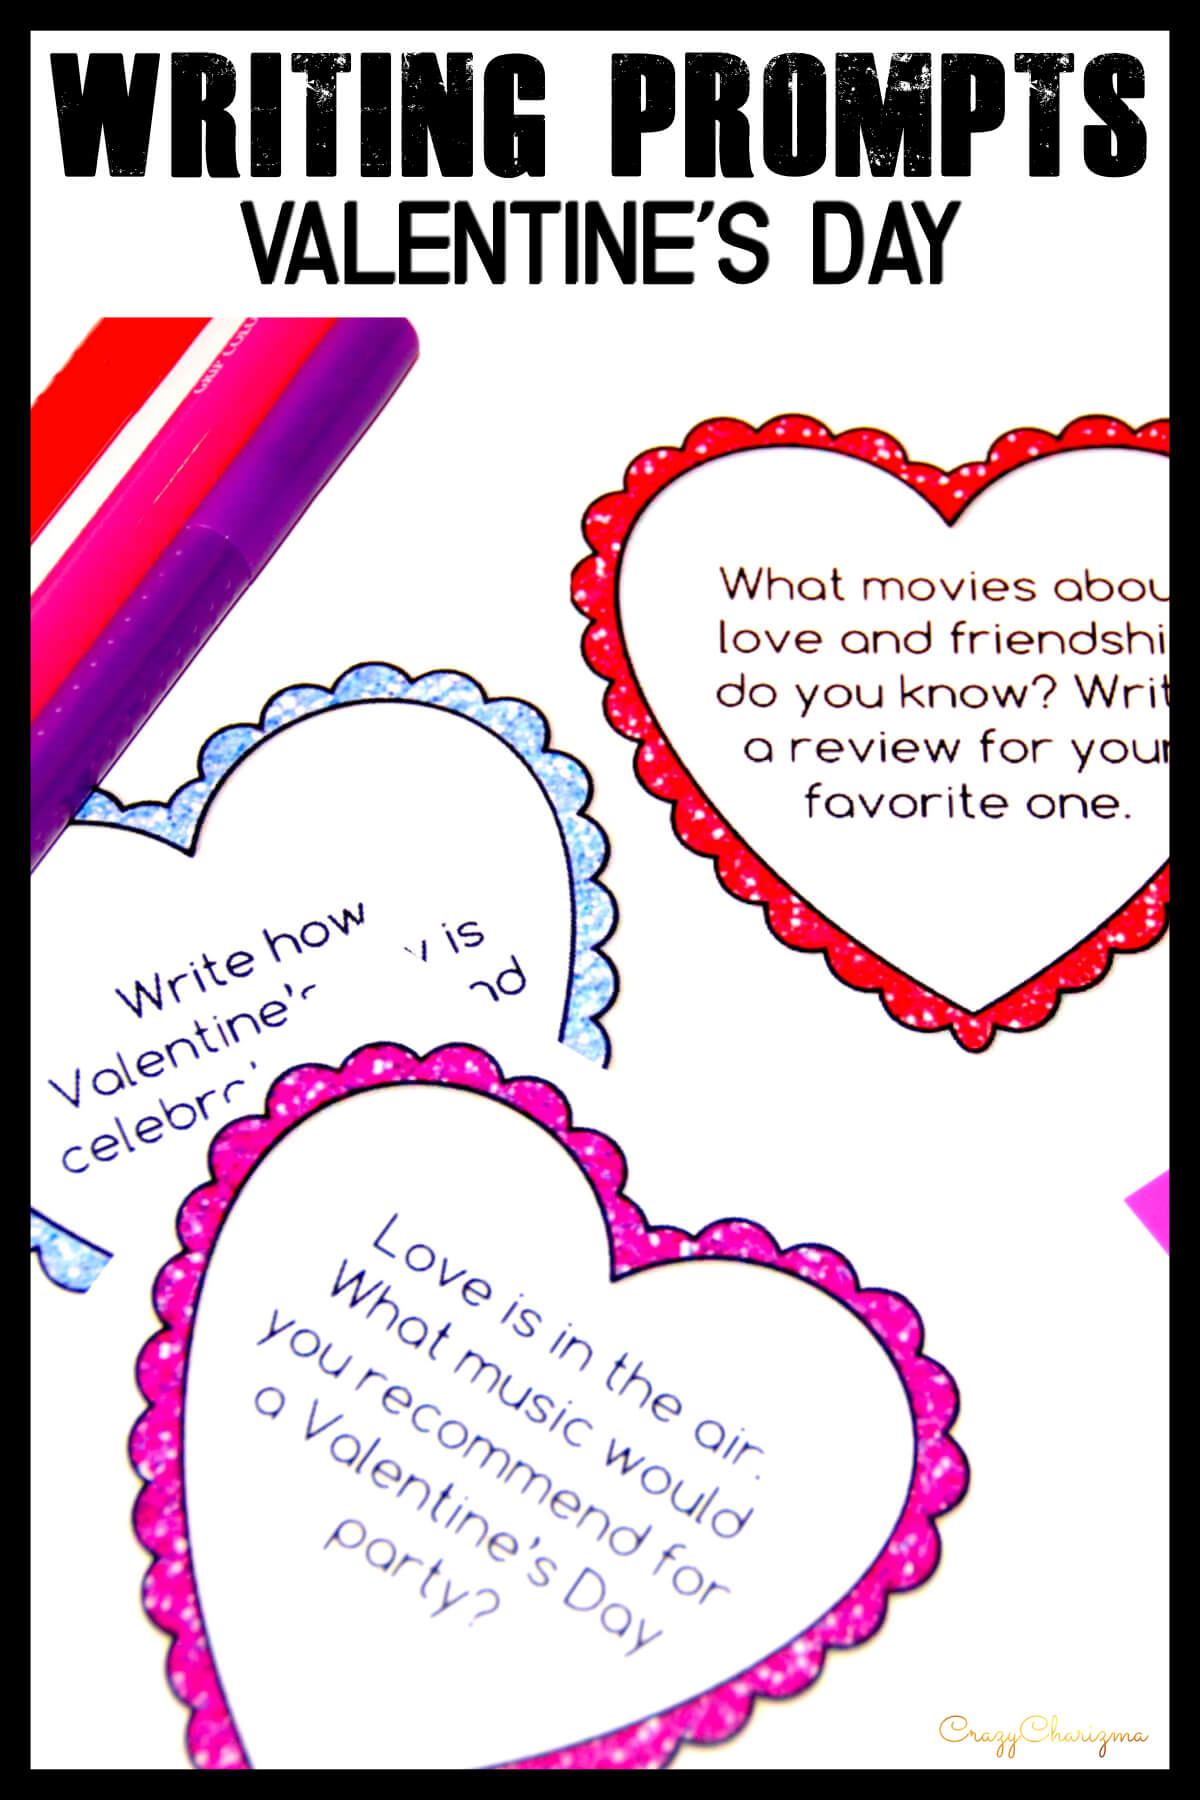 Celebrate Valentine's Day in your classroom and provide students with writing tasks and ideas. The packet contains narrative, informational and opinion writing prompts for teens. The prompts can be used as Writing Centers, as well as with adults during ESL lessons.